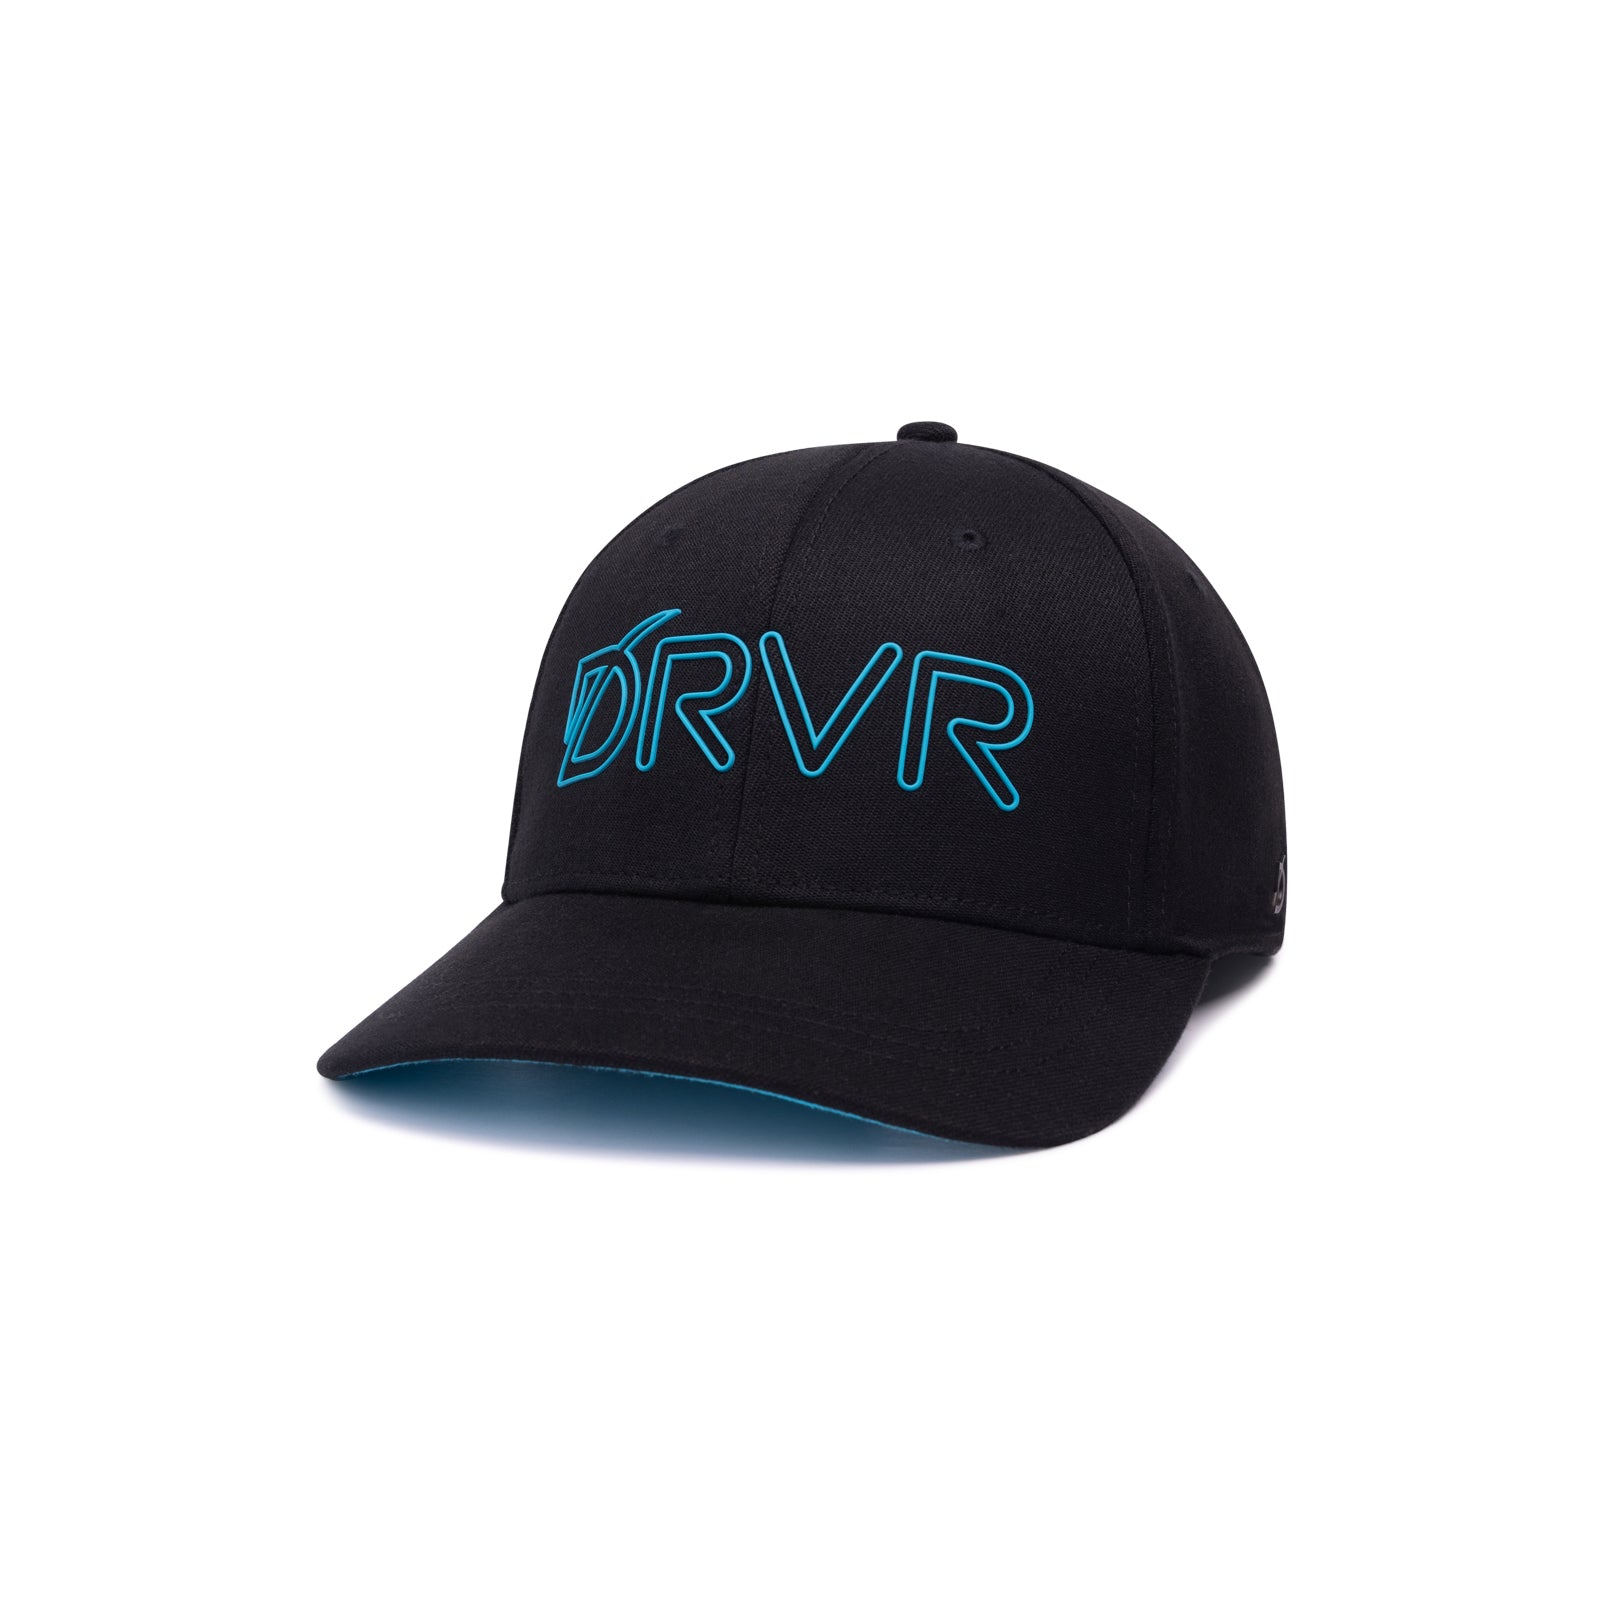 DRVR THE – TIPS FROM